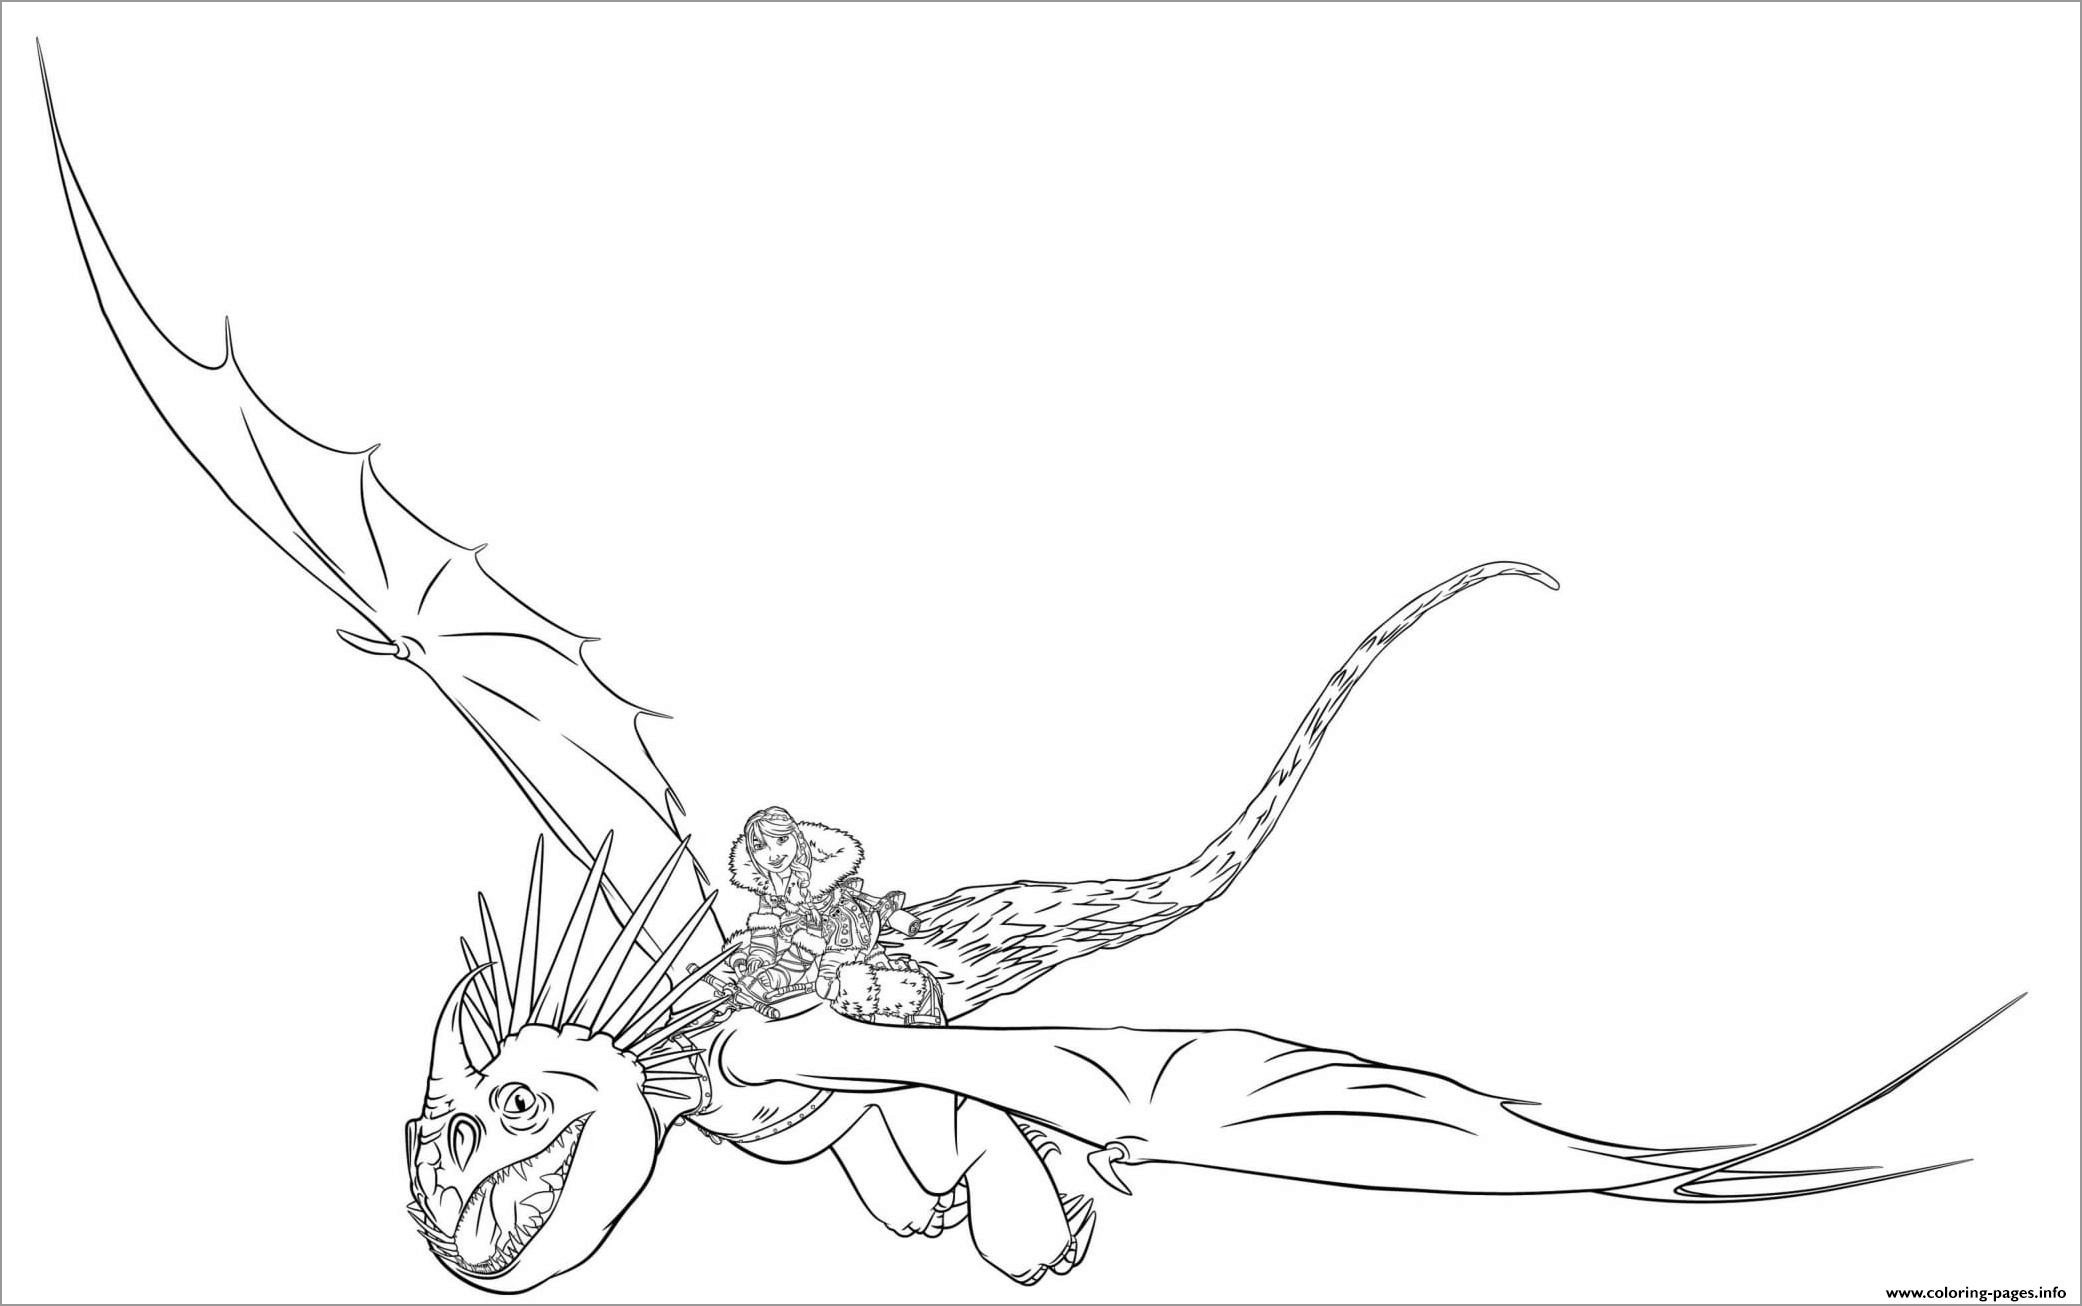 How to Train Your Dragon astrid Ride Stormfly Coloring Page